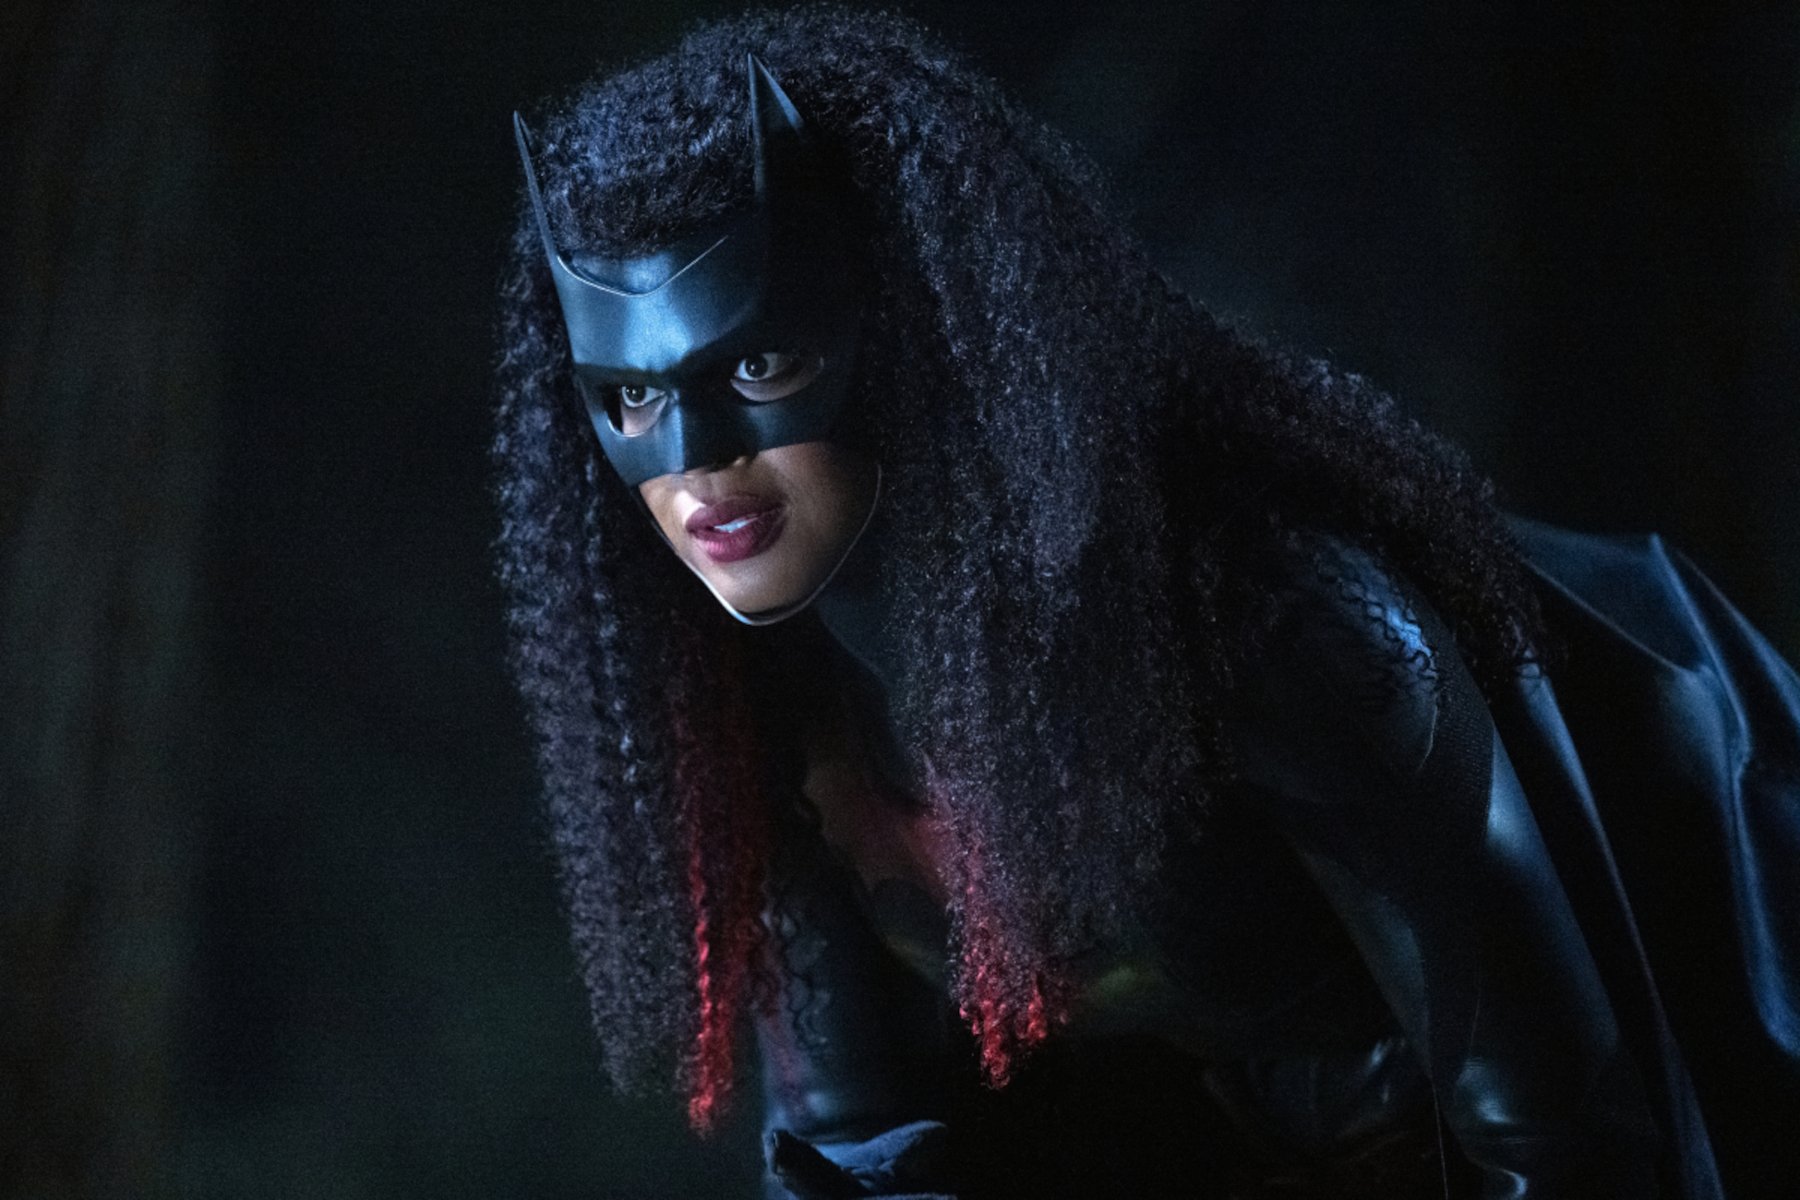 Javicia Leslie as Batwoman in The CW's 'Batwoman,' which received a cancellation. Her hair is down, and she's wearing the black mask and Batsuit.